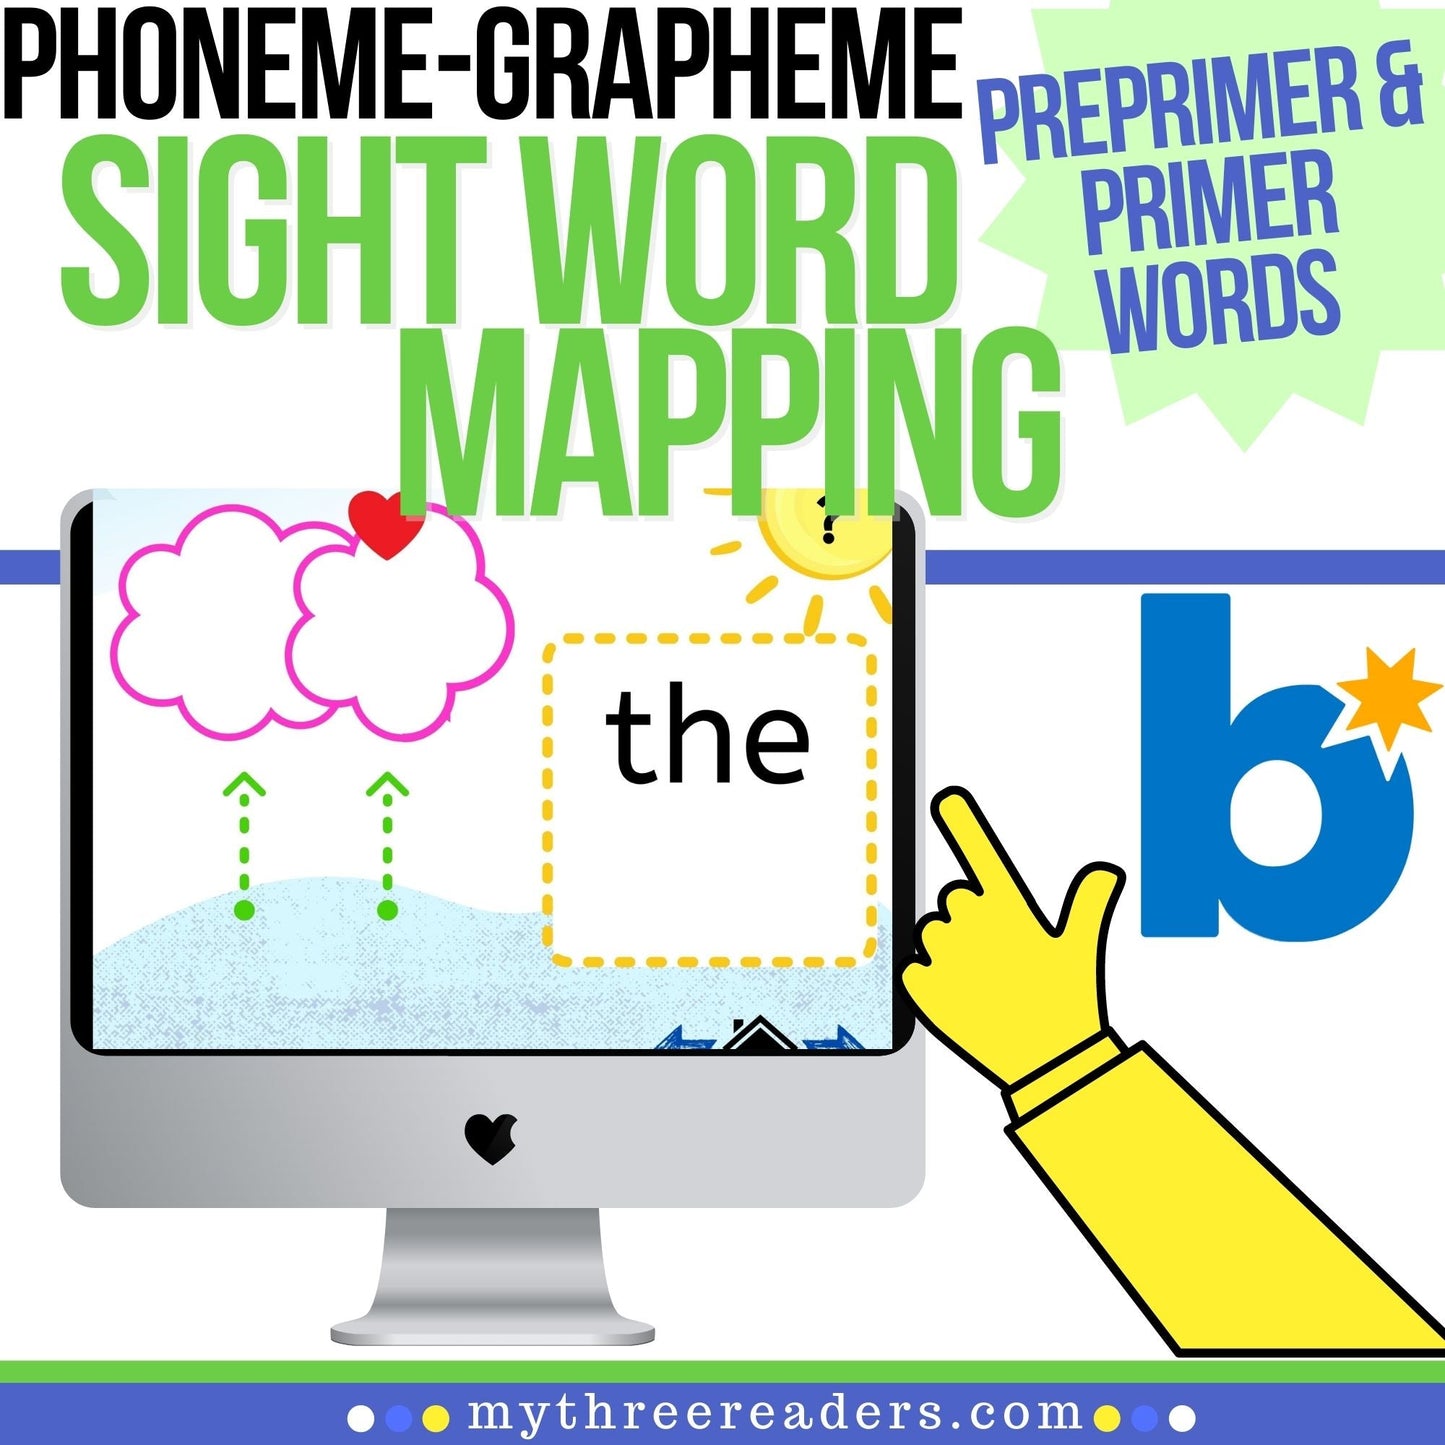 Mapping the High Frequency Words 1st and 2nd Grade